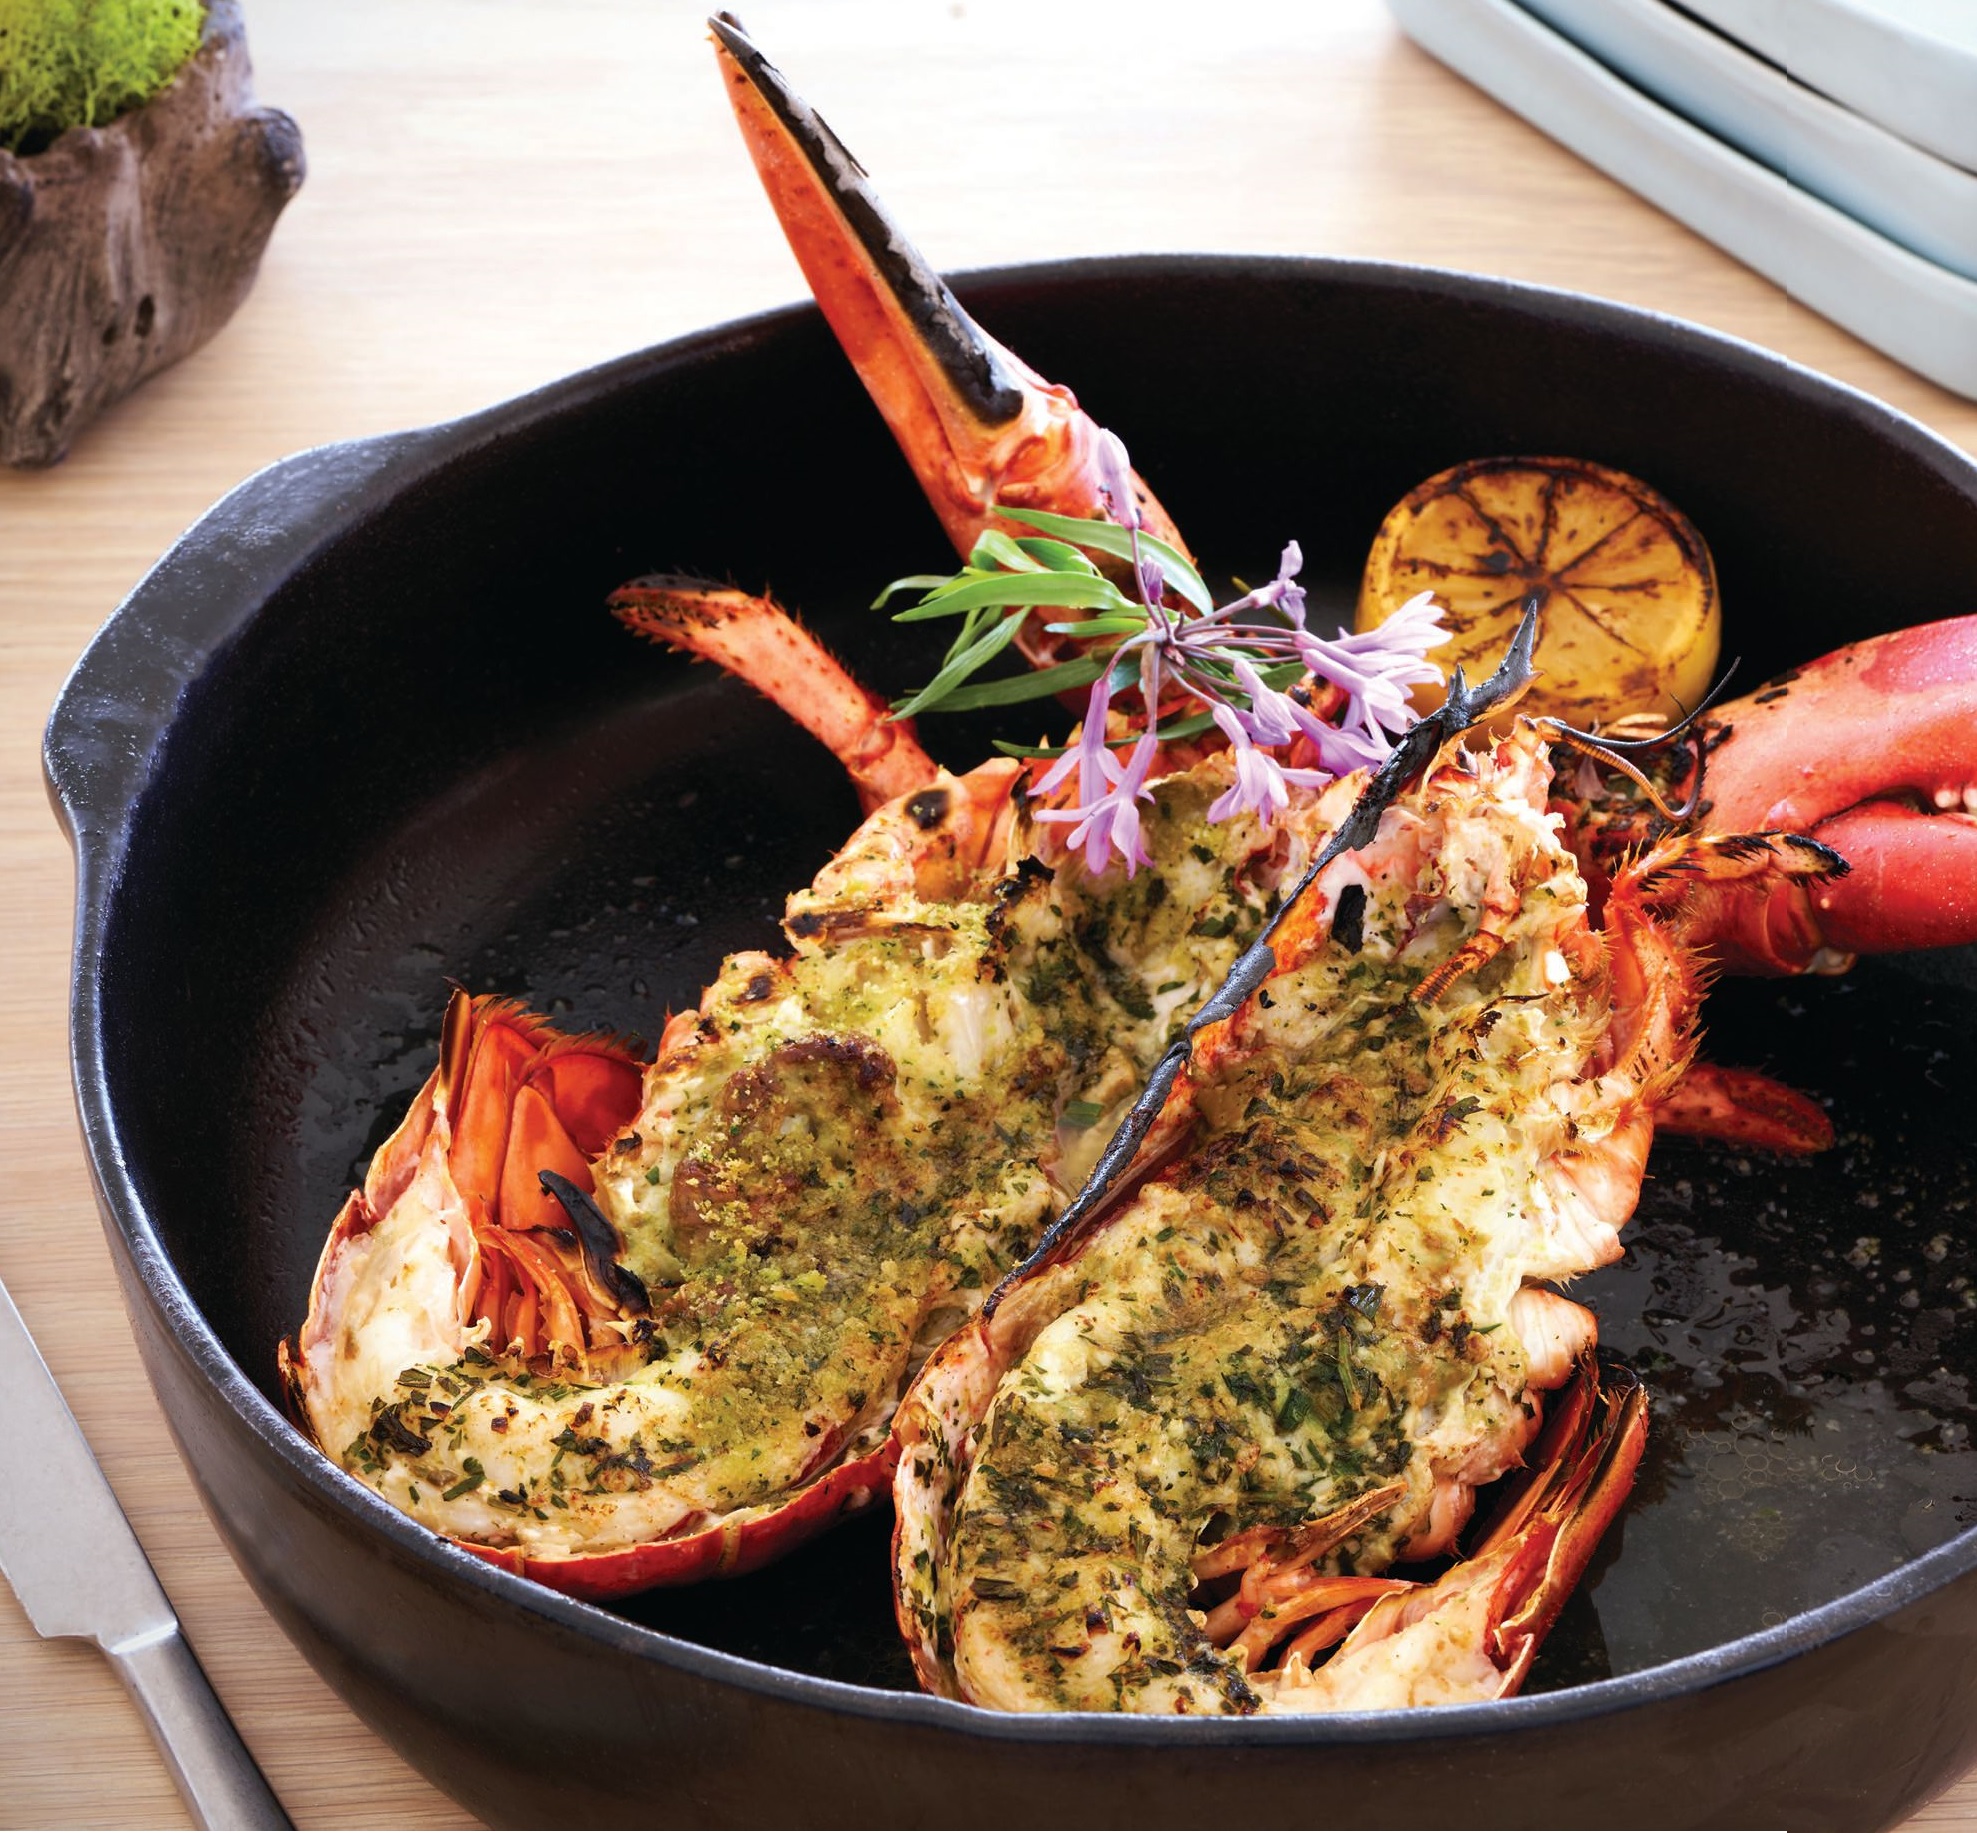 The 1 ½-pound broiled whole spiny lobster is topped with garlic tarragon butter and breadcrumbs. PHOTO BY KEVIN MARPLE